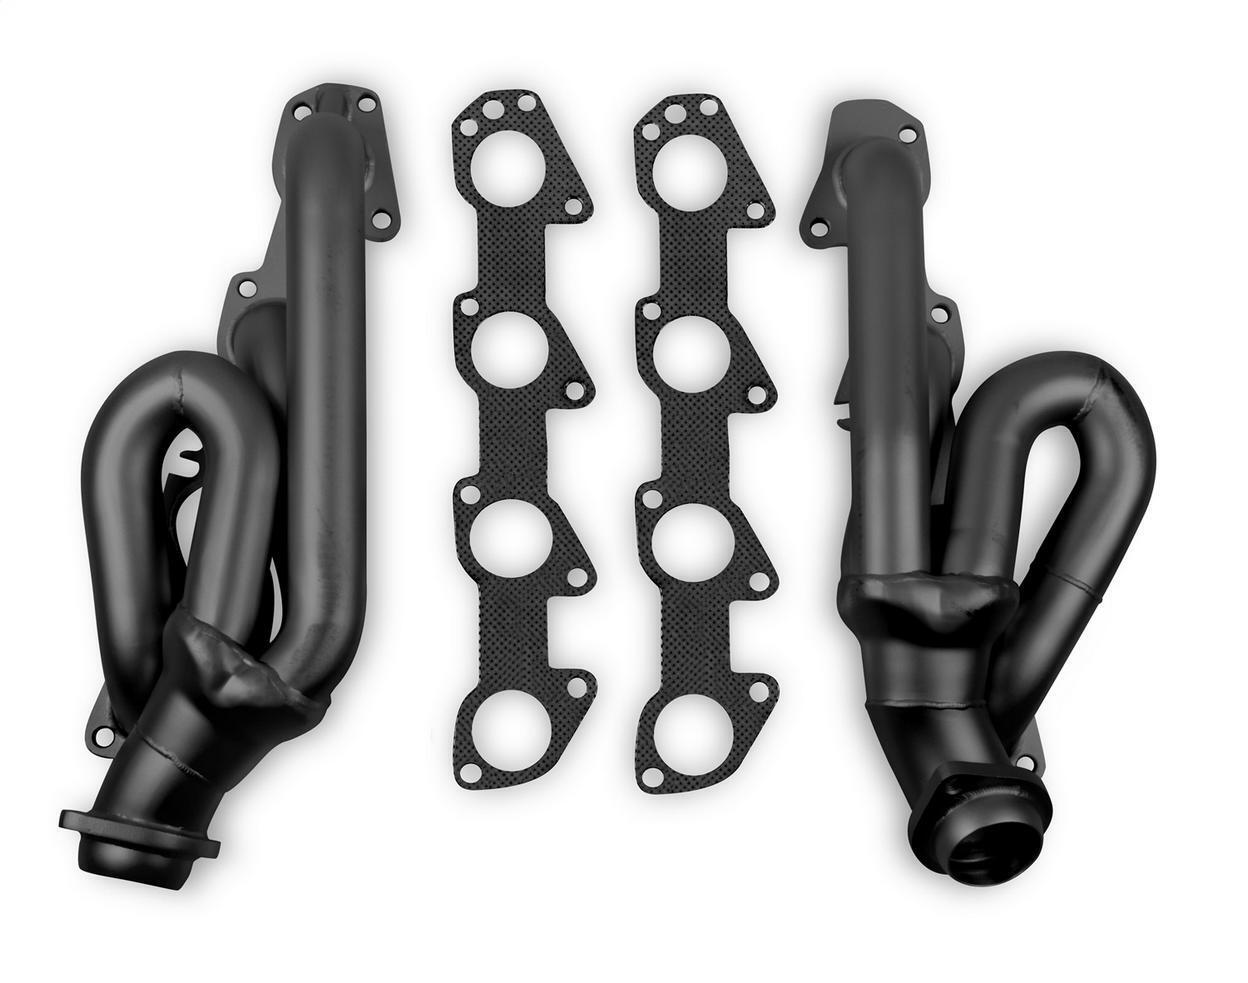 Exhaust Header for 2015-2017 Ram 1500 Special Service 5.7L V8 GAS OHV